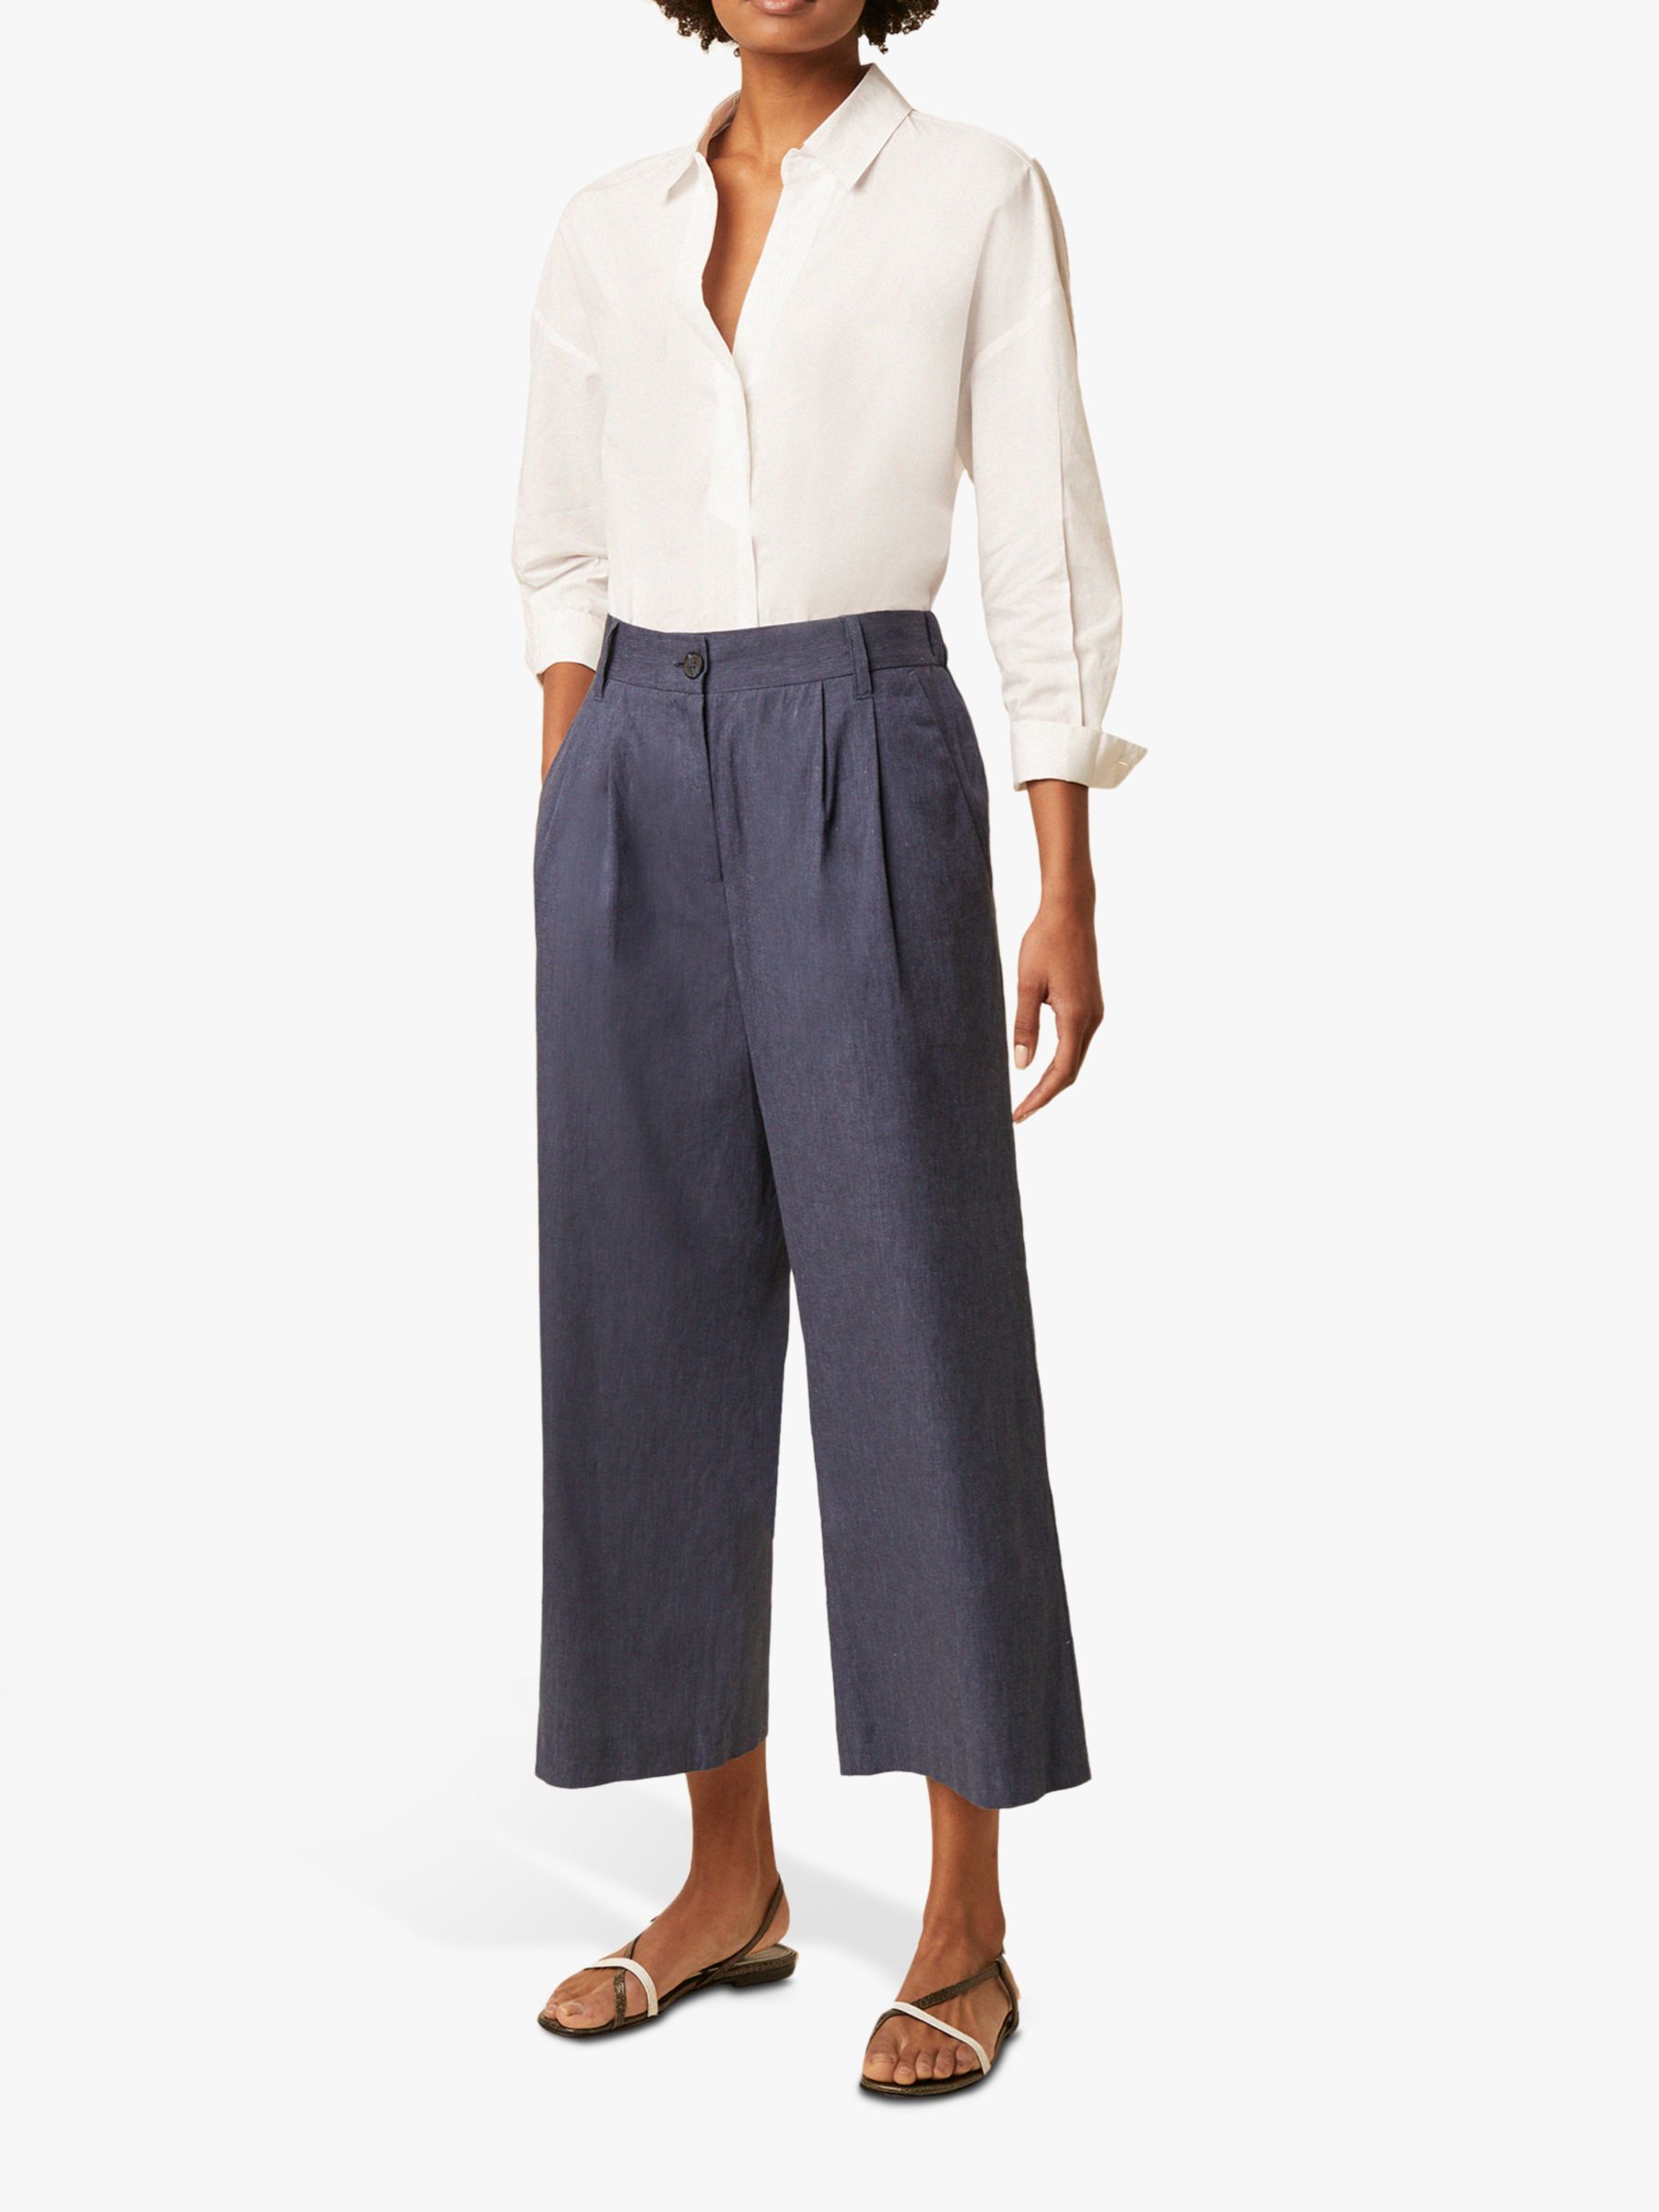 French Connection Wide Leg Culotte Trousers, Blue at John Lewis & Partners